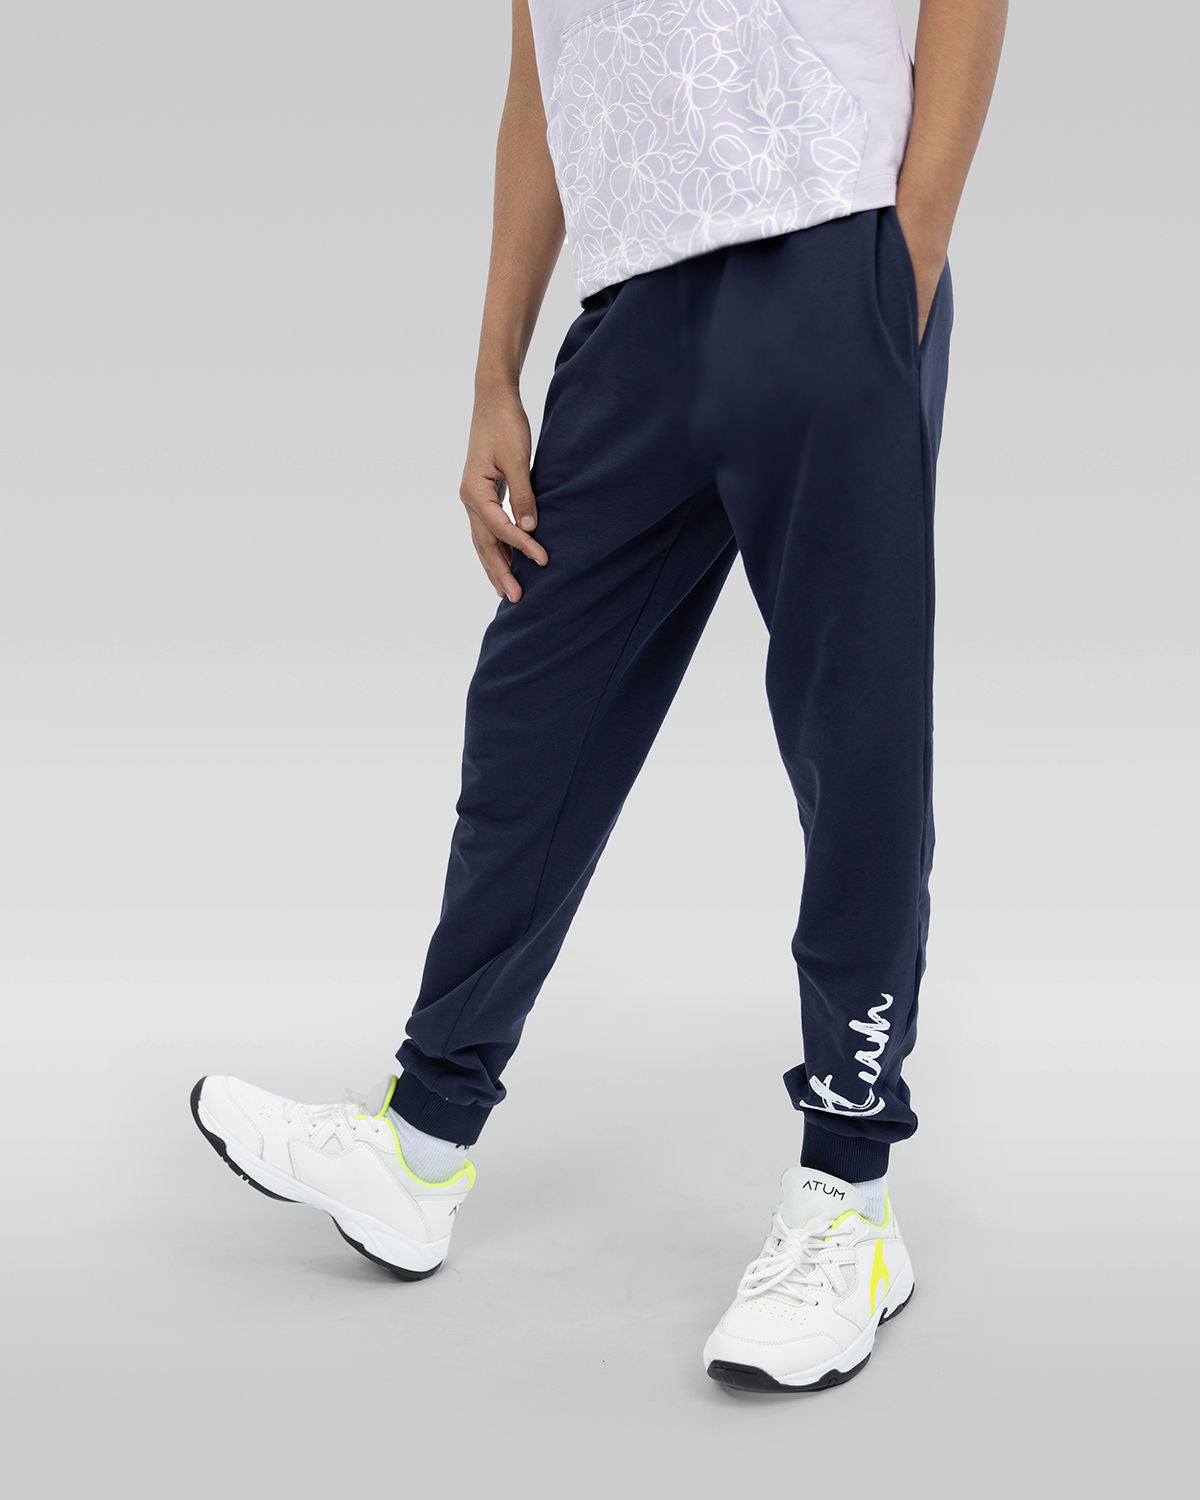 Simple and smooth girls sweatpants